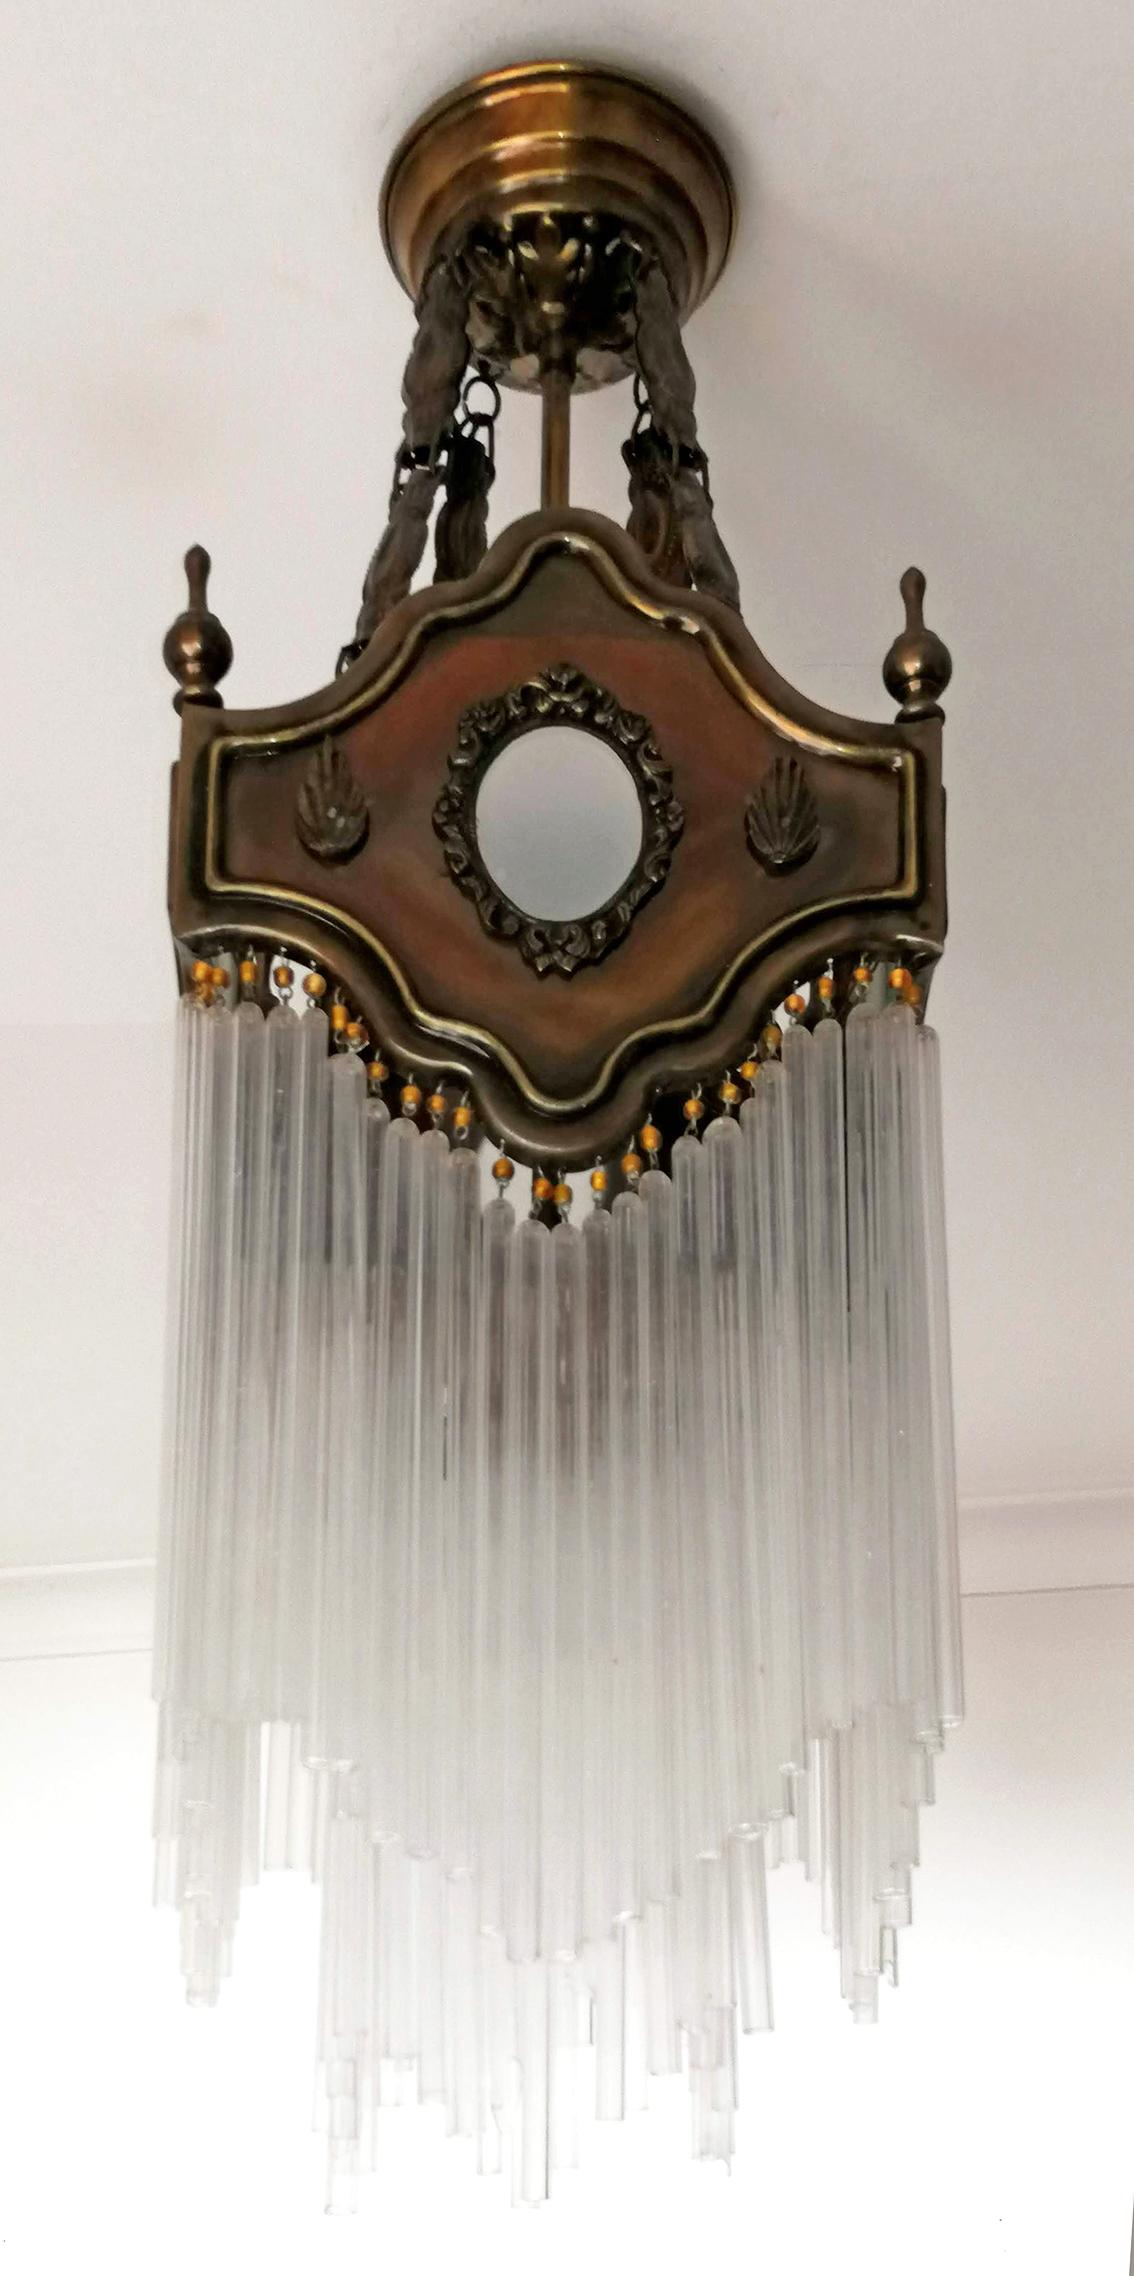 Beautiful antique French Art Nouveau Art Deco gilded bronze lanterns and amber beaded glass straw fringe, 2 tiers.
Measures:
Depth 8.7 in /22 cm
Width 8.7 in /22 cm
Diagonal 12 in/ 30 cm
Height 27.5 in / 70 cm
Weight 6 Kg / 12 lb
3-light bulbs E-14